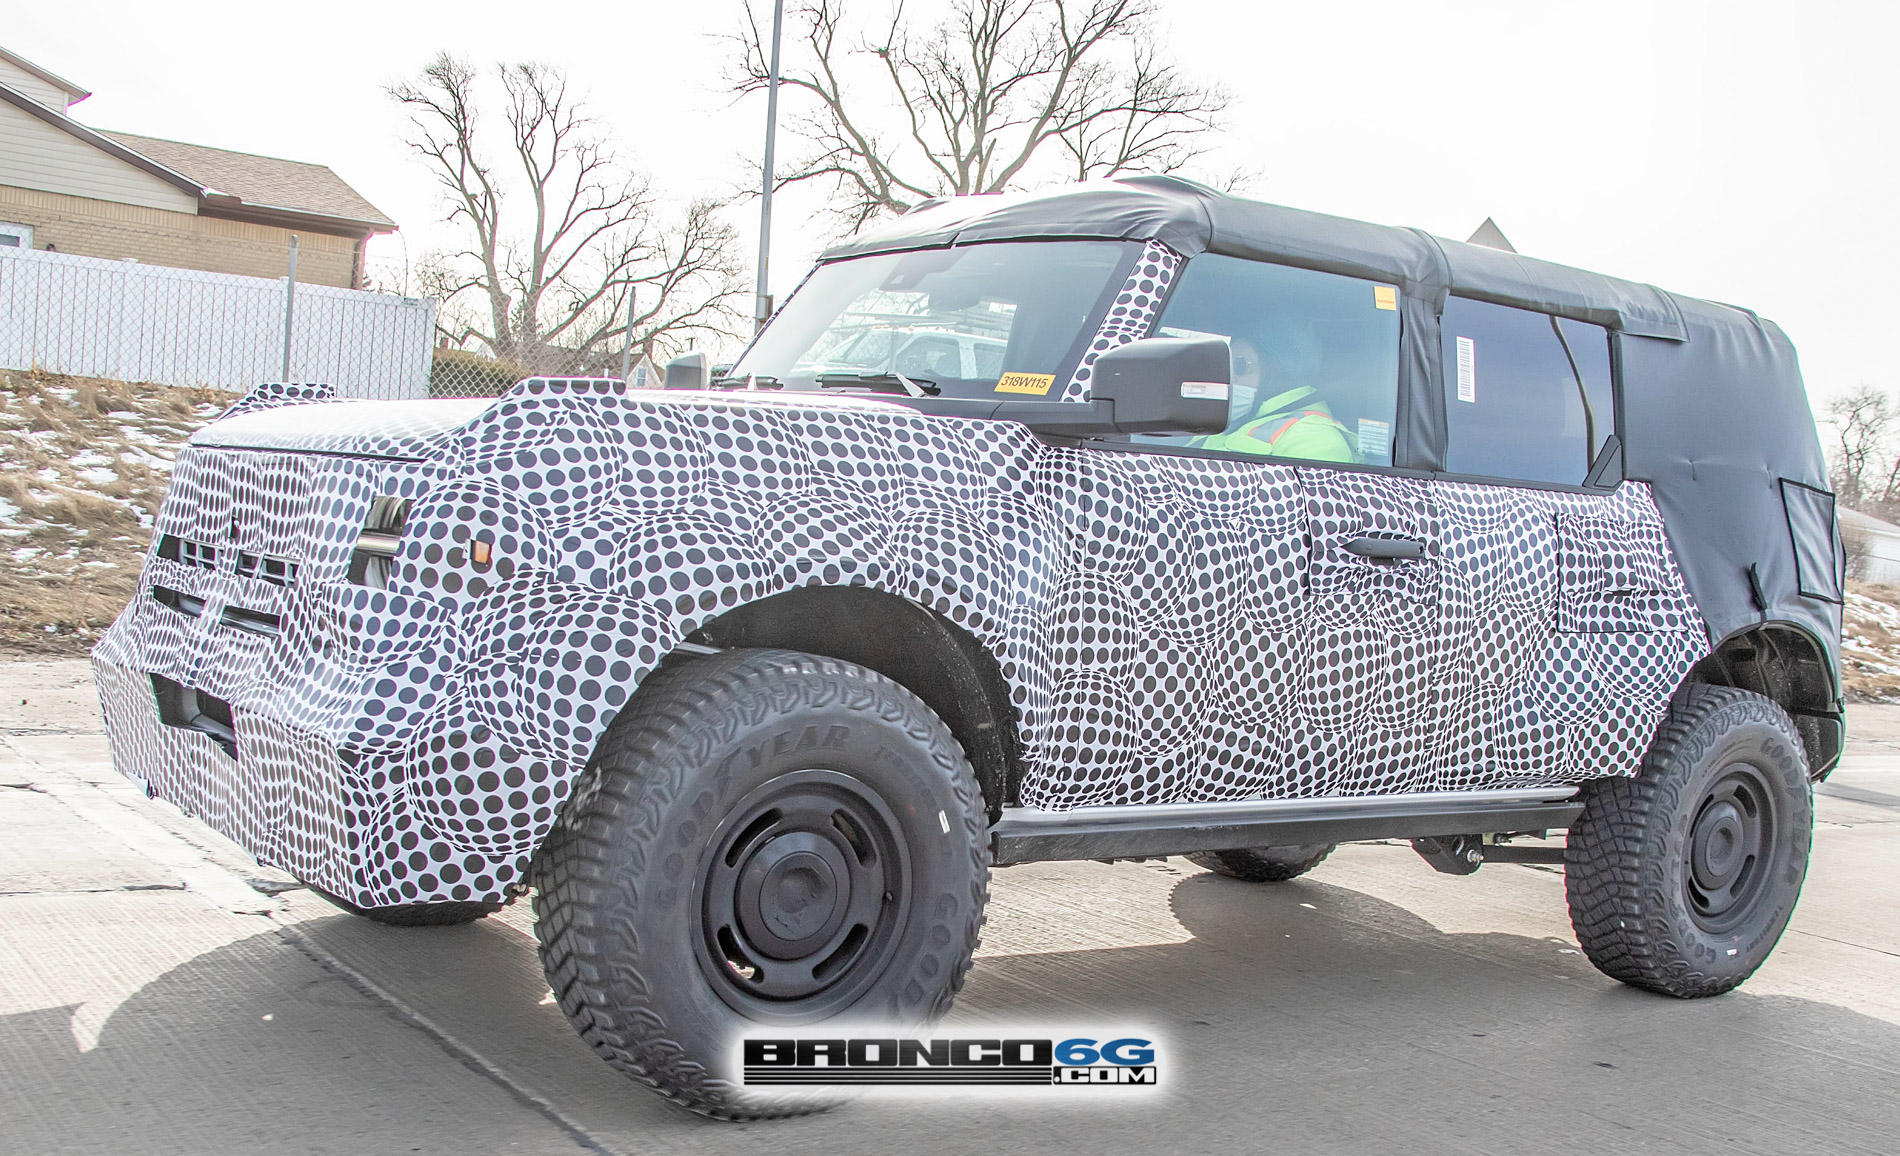 Ford Bronco 🦖 Bronco Raptor Officially Confirmed and Teased by Ford! 8CA55B4C-59BC-41EE-831F-38DCCB6E64DD